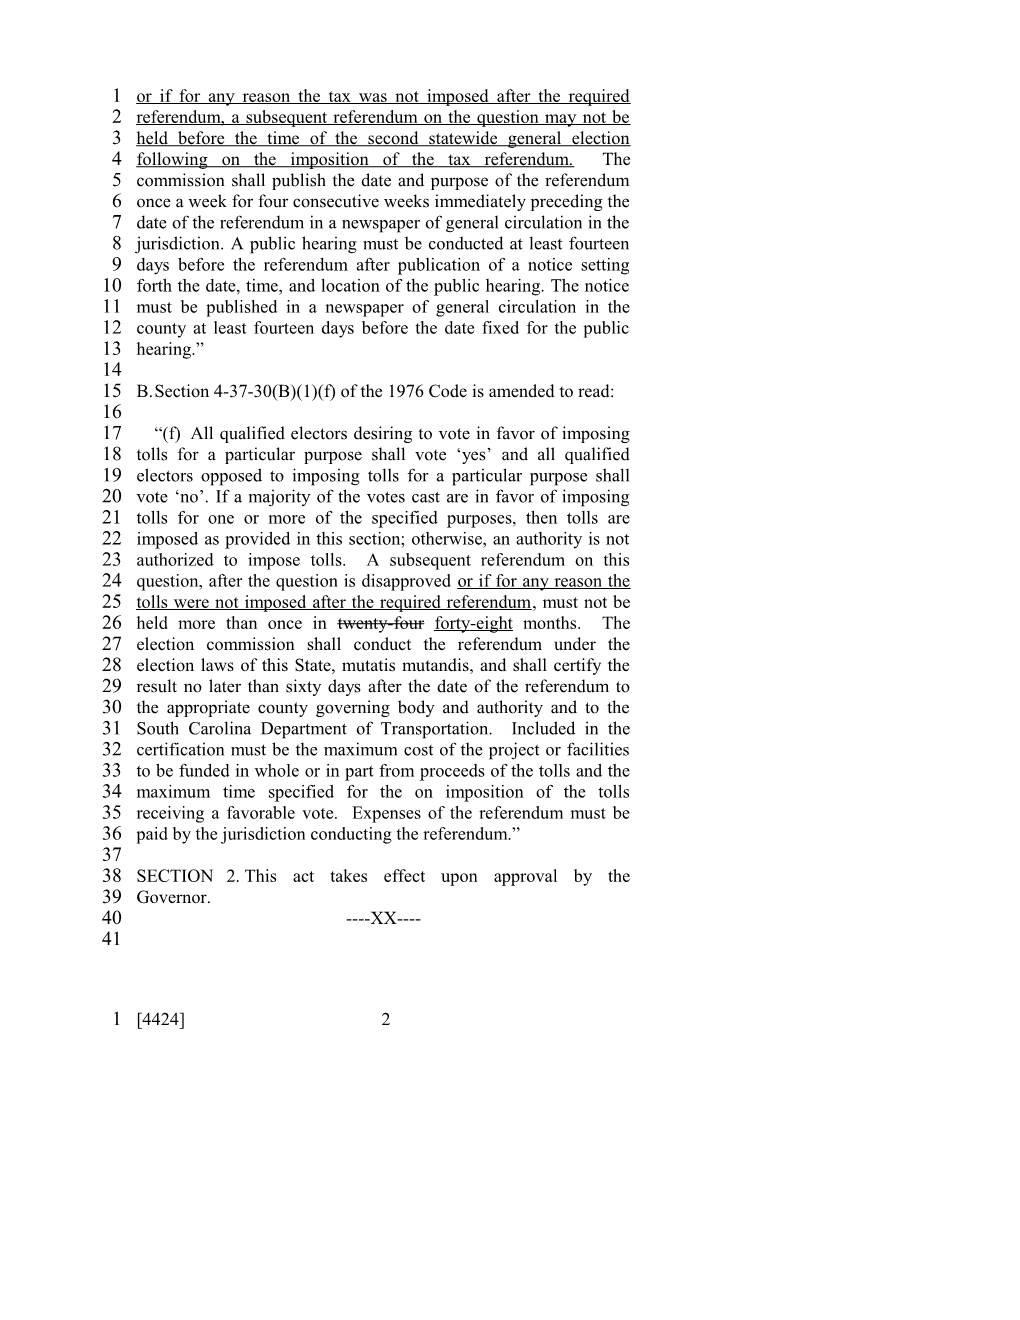 2003-2004 Bill 4424: Provisions Regarding Frequency of County Referenda Dealing With